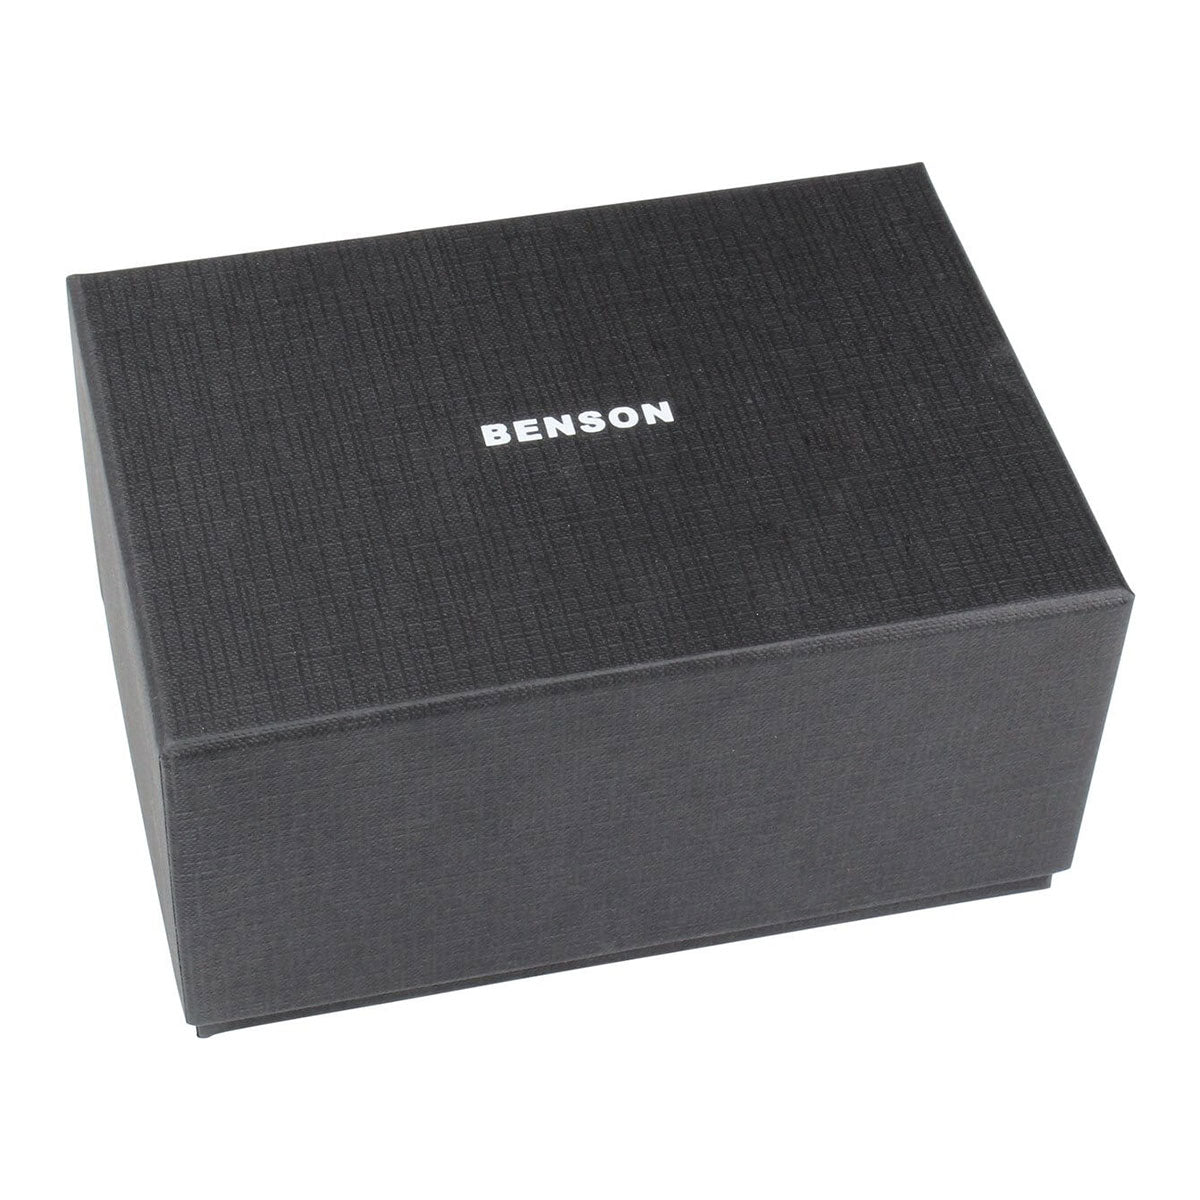 Benson Black Series - Watch roll for 2 watches